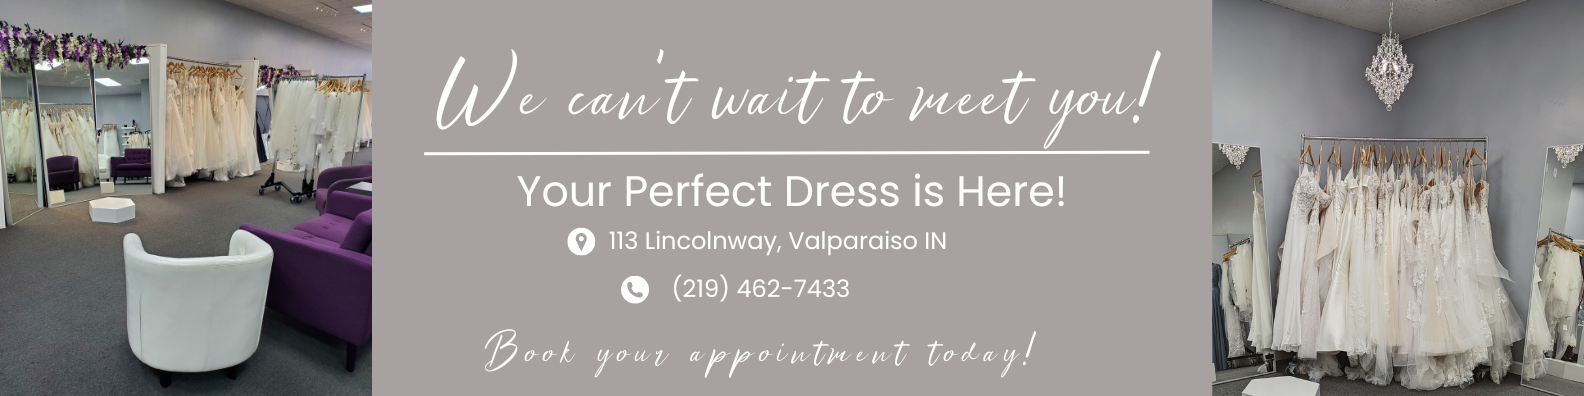 Book an appointment today!